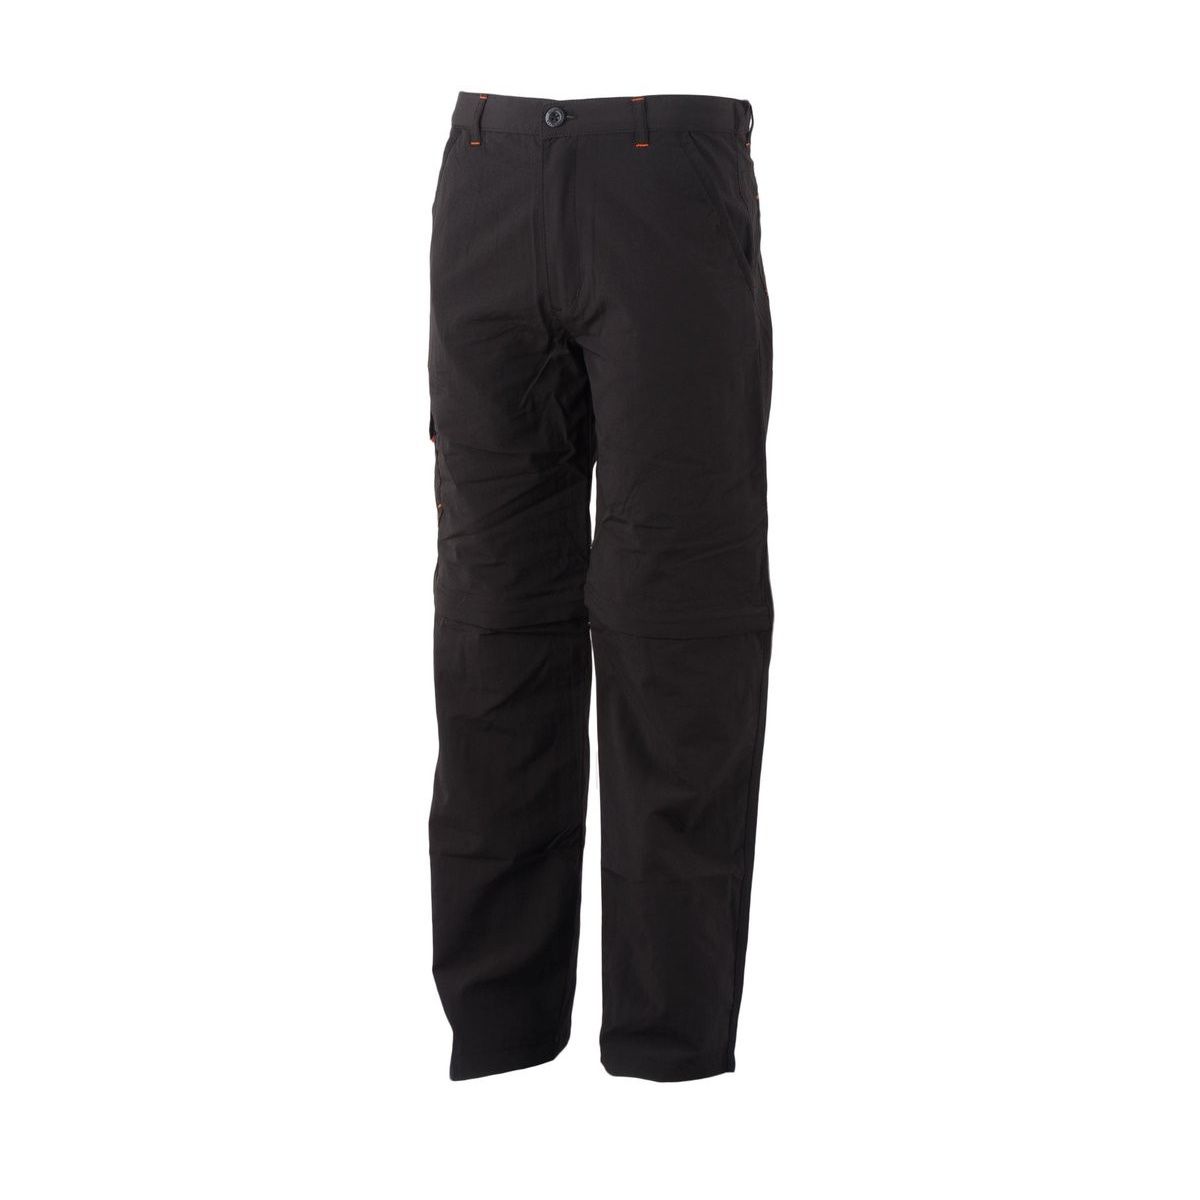 Boys zip-off trousers. Lightweight, showerproof and multi pocketed. Part-elasticated waist with button adjustment system. Quick drying and crease resistant fabric. 100% Polyamide. Regatta Kids Sizing (waist approx): 2 Years (52-53cm), 3-4 Years (53-54cm), 5-6 Years (55-57cm), 7-8 Years (58-60cm), 9-10 Years (61-64cm), 11-12 Years (65-67cm), 26 (68-70cm), 28 (70-72cm).